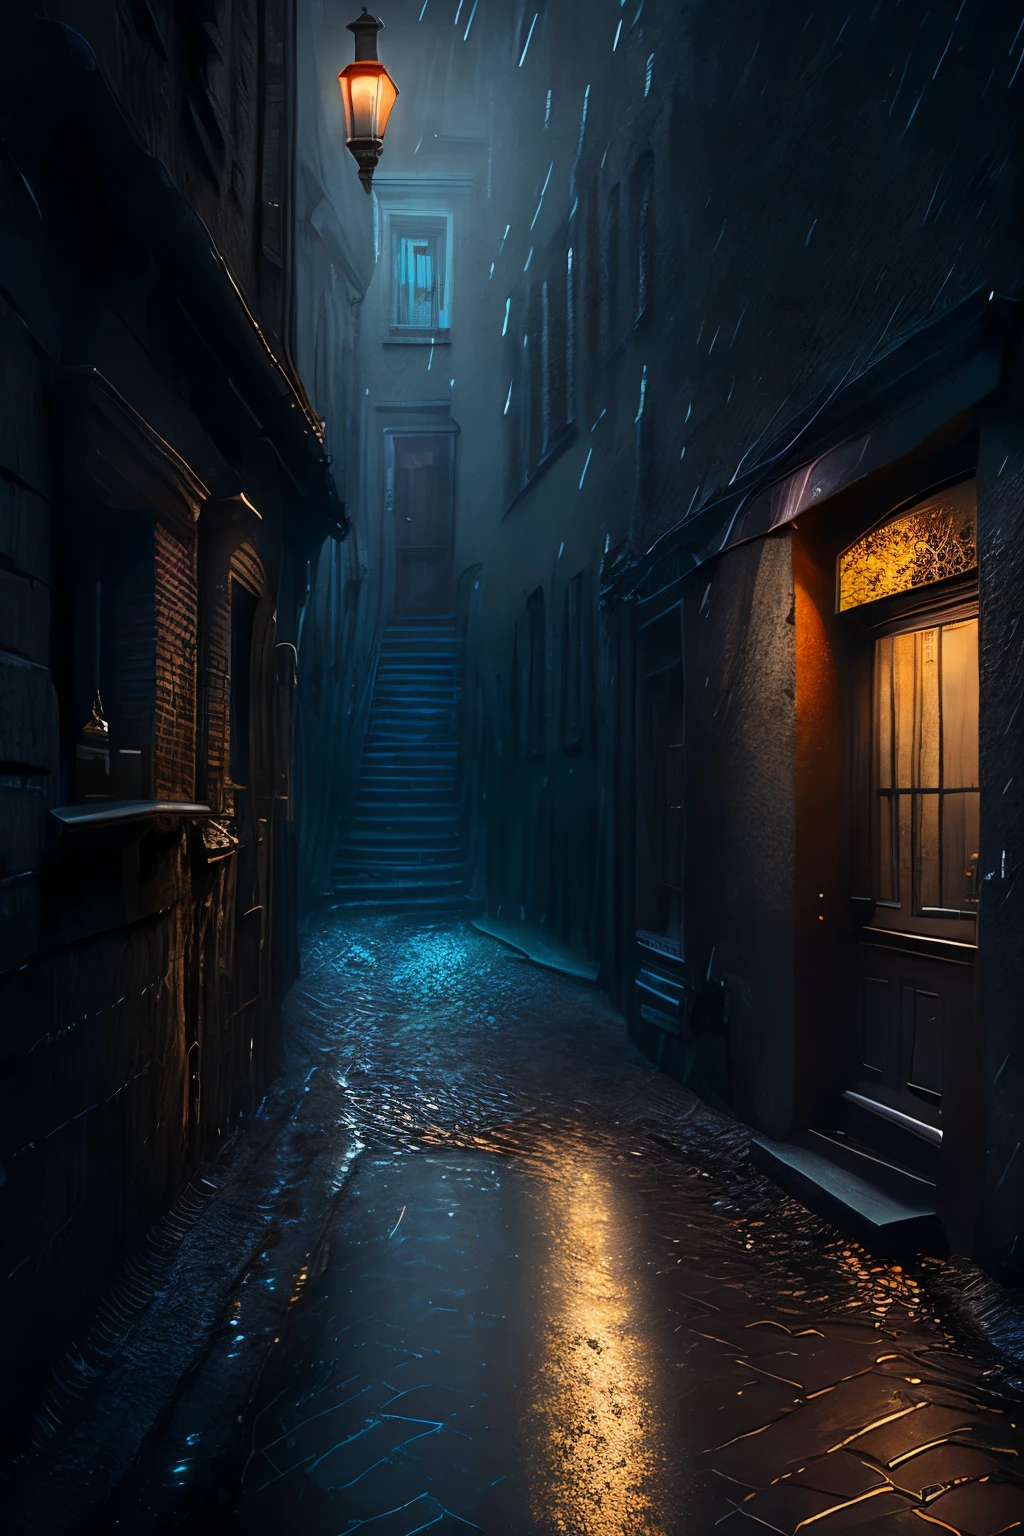 A dark alley on a gloomy,  and mysterious night, a floor made of wet cobblestones, with gutters running accumulated rainwater, a slightly torrential rain, someone with a hooded case distancing himself with steps of escape from something that is lurking around him, intricate, realistic, a blurred image of escape movements, nebulous and mucusy and twisted tentacles appearing in the corners of the mysterious street.